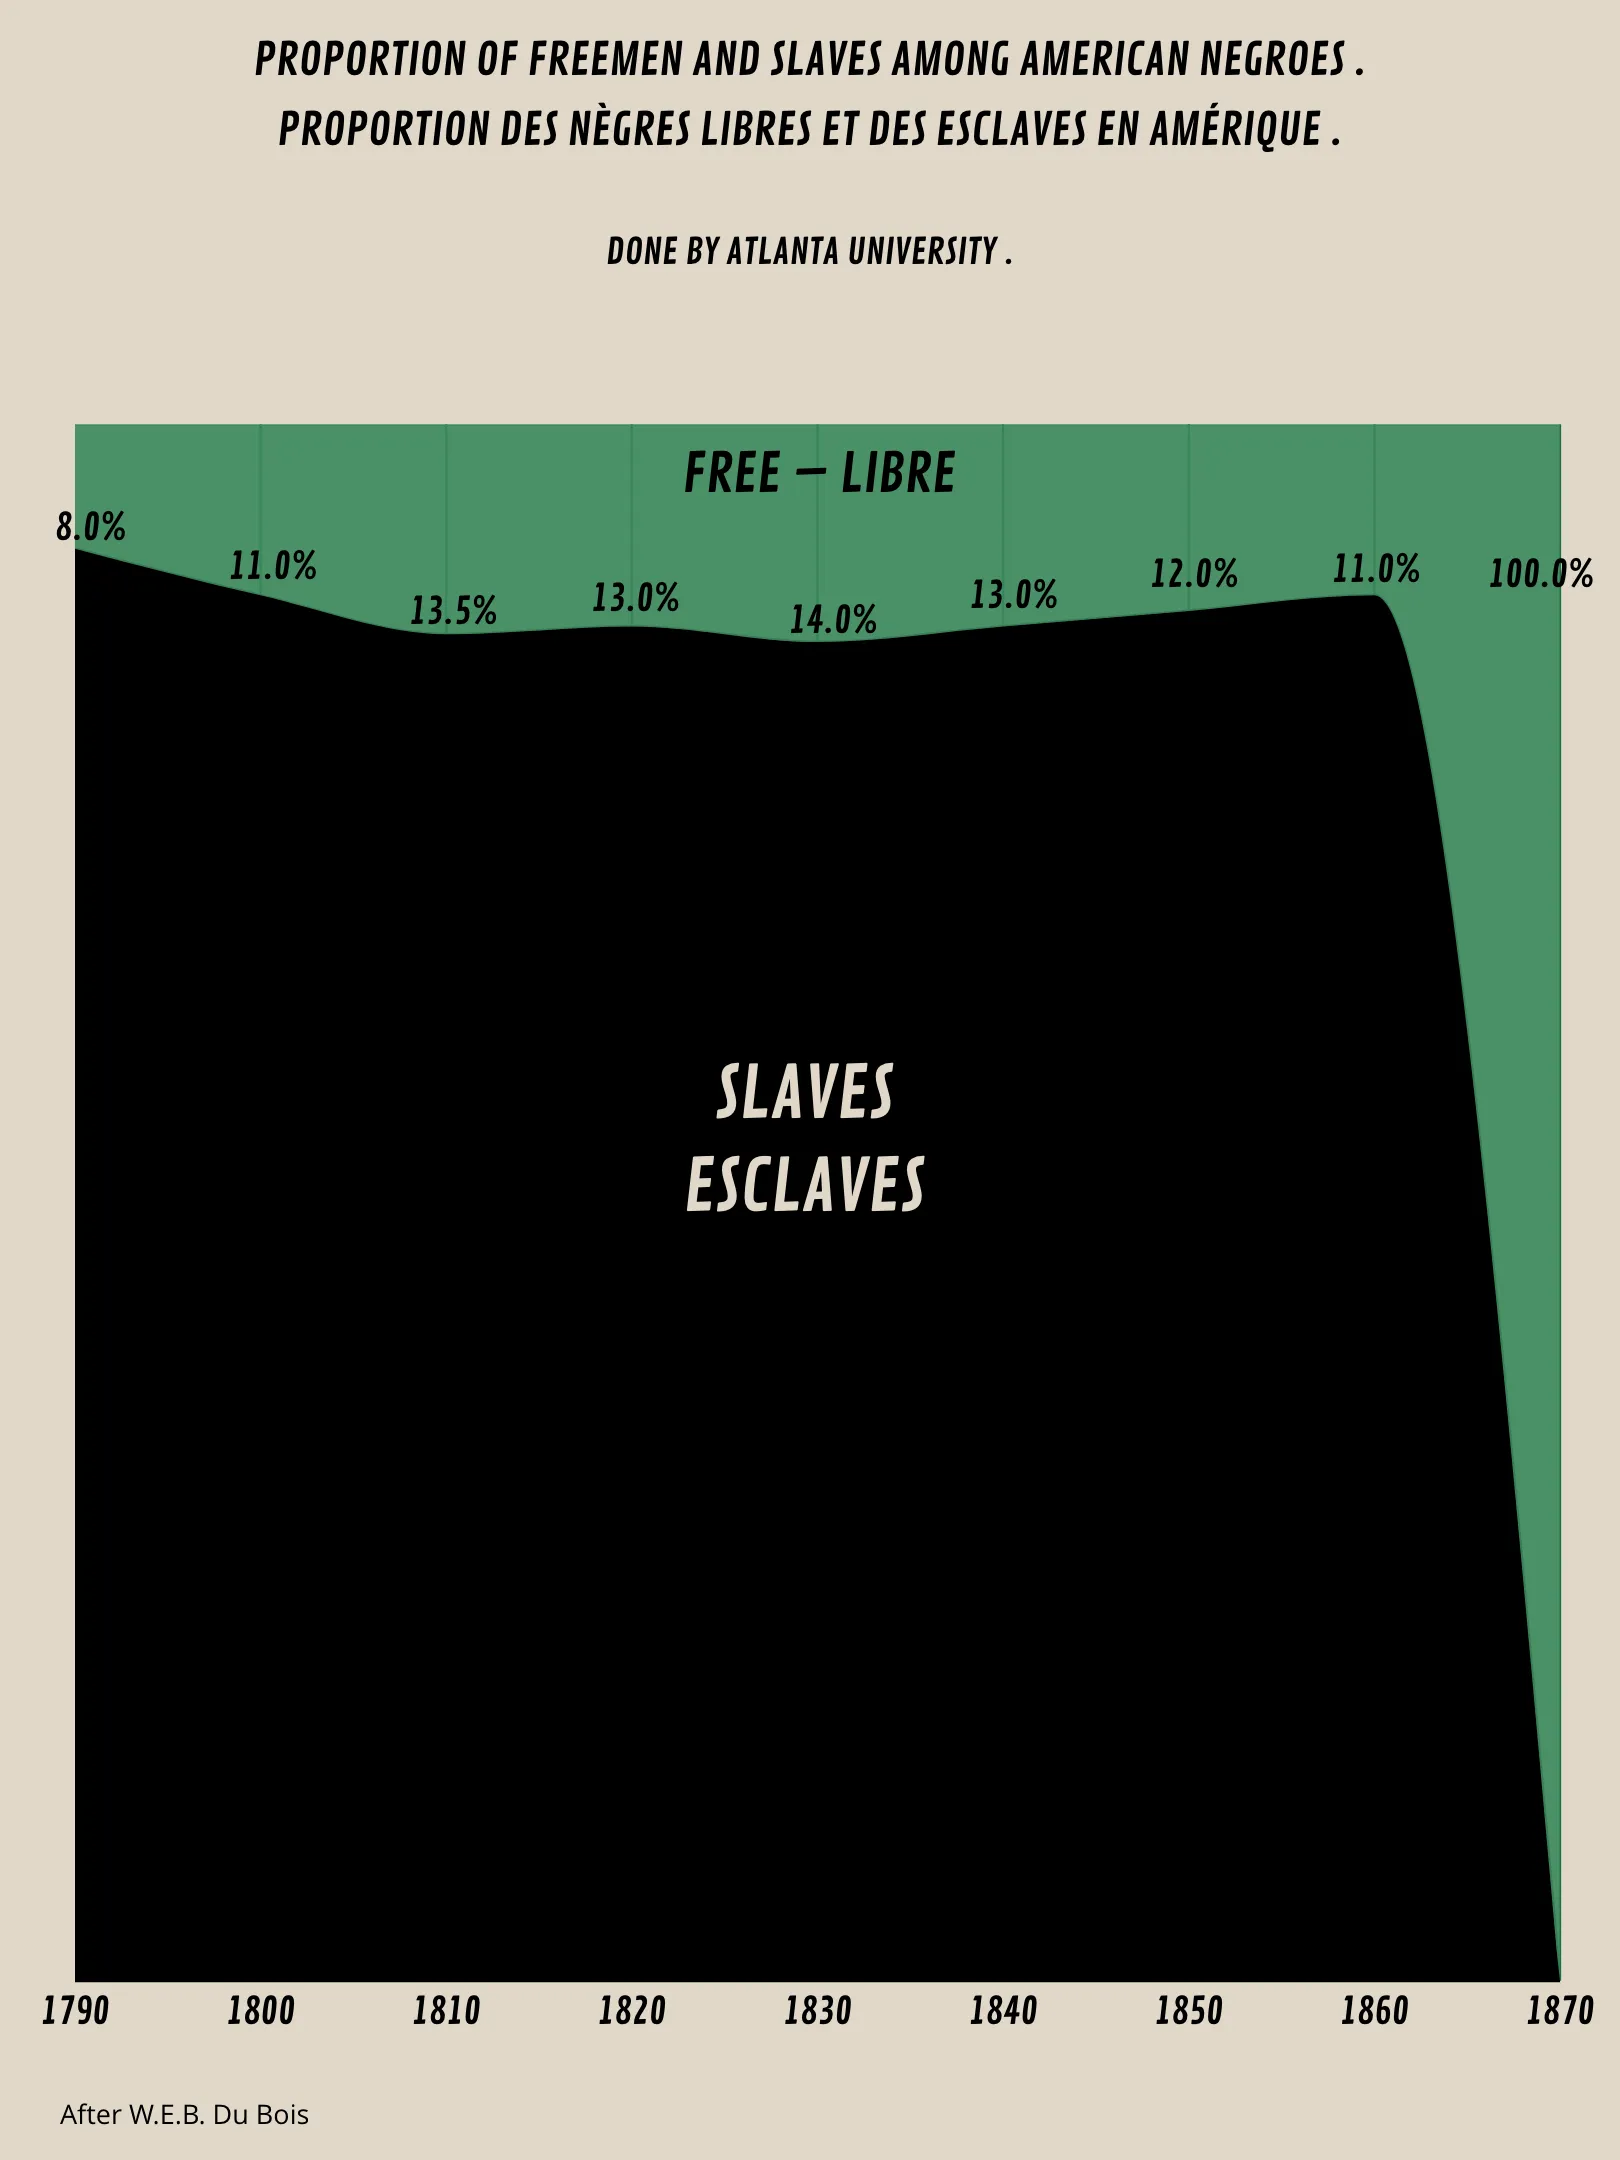 PROPORTION OF FREEMEN AND SLAVES AMONG AMERICAN NEGROES